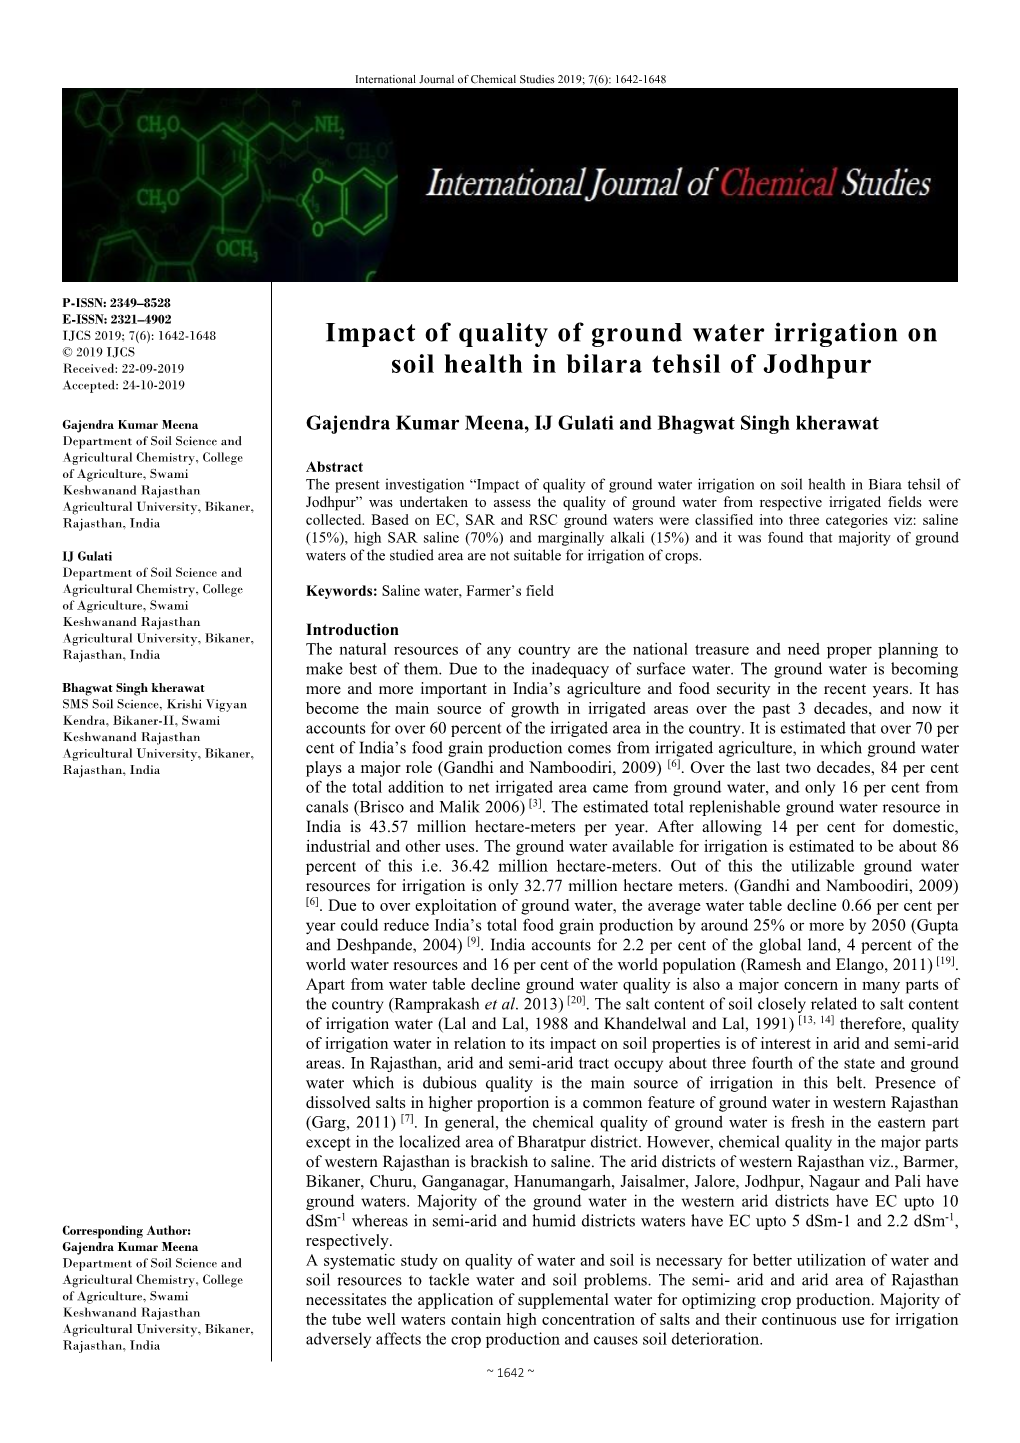 Impact of Quality of Ground Water Irrigation on Soil Health in Bilara